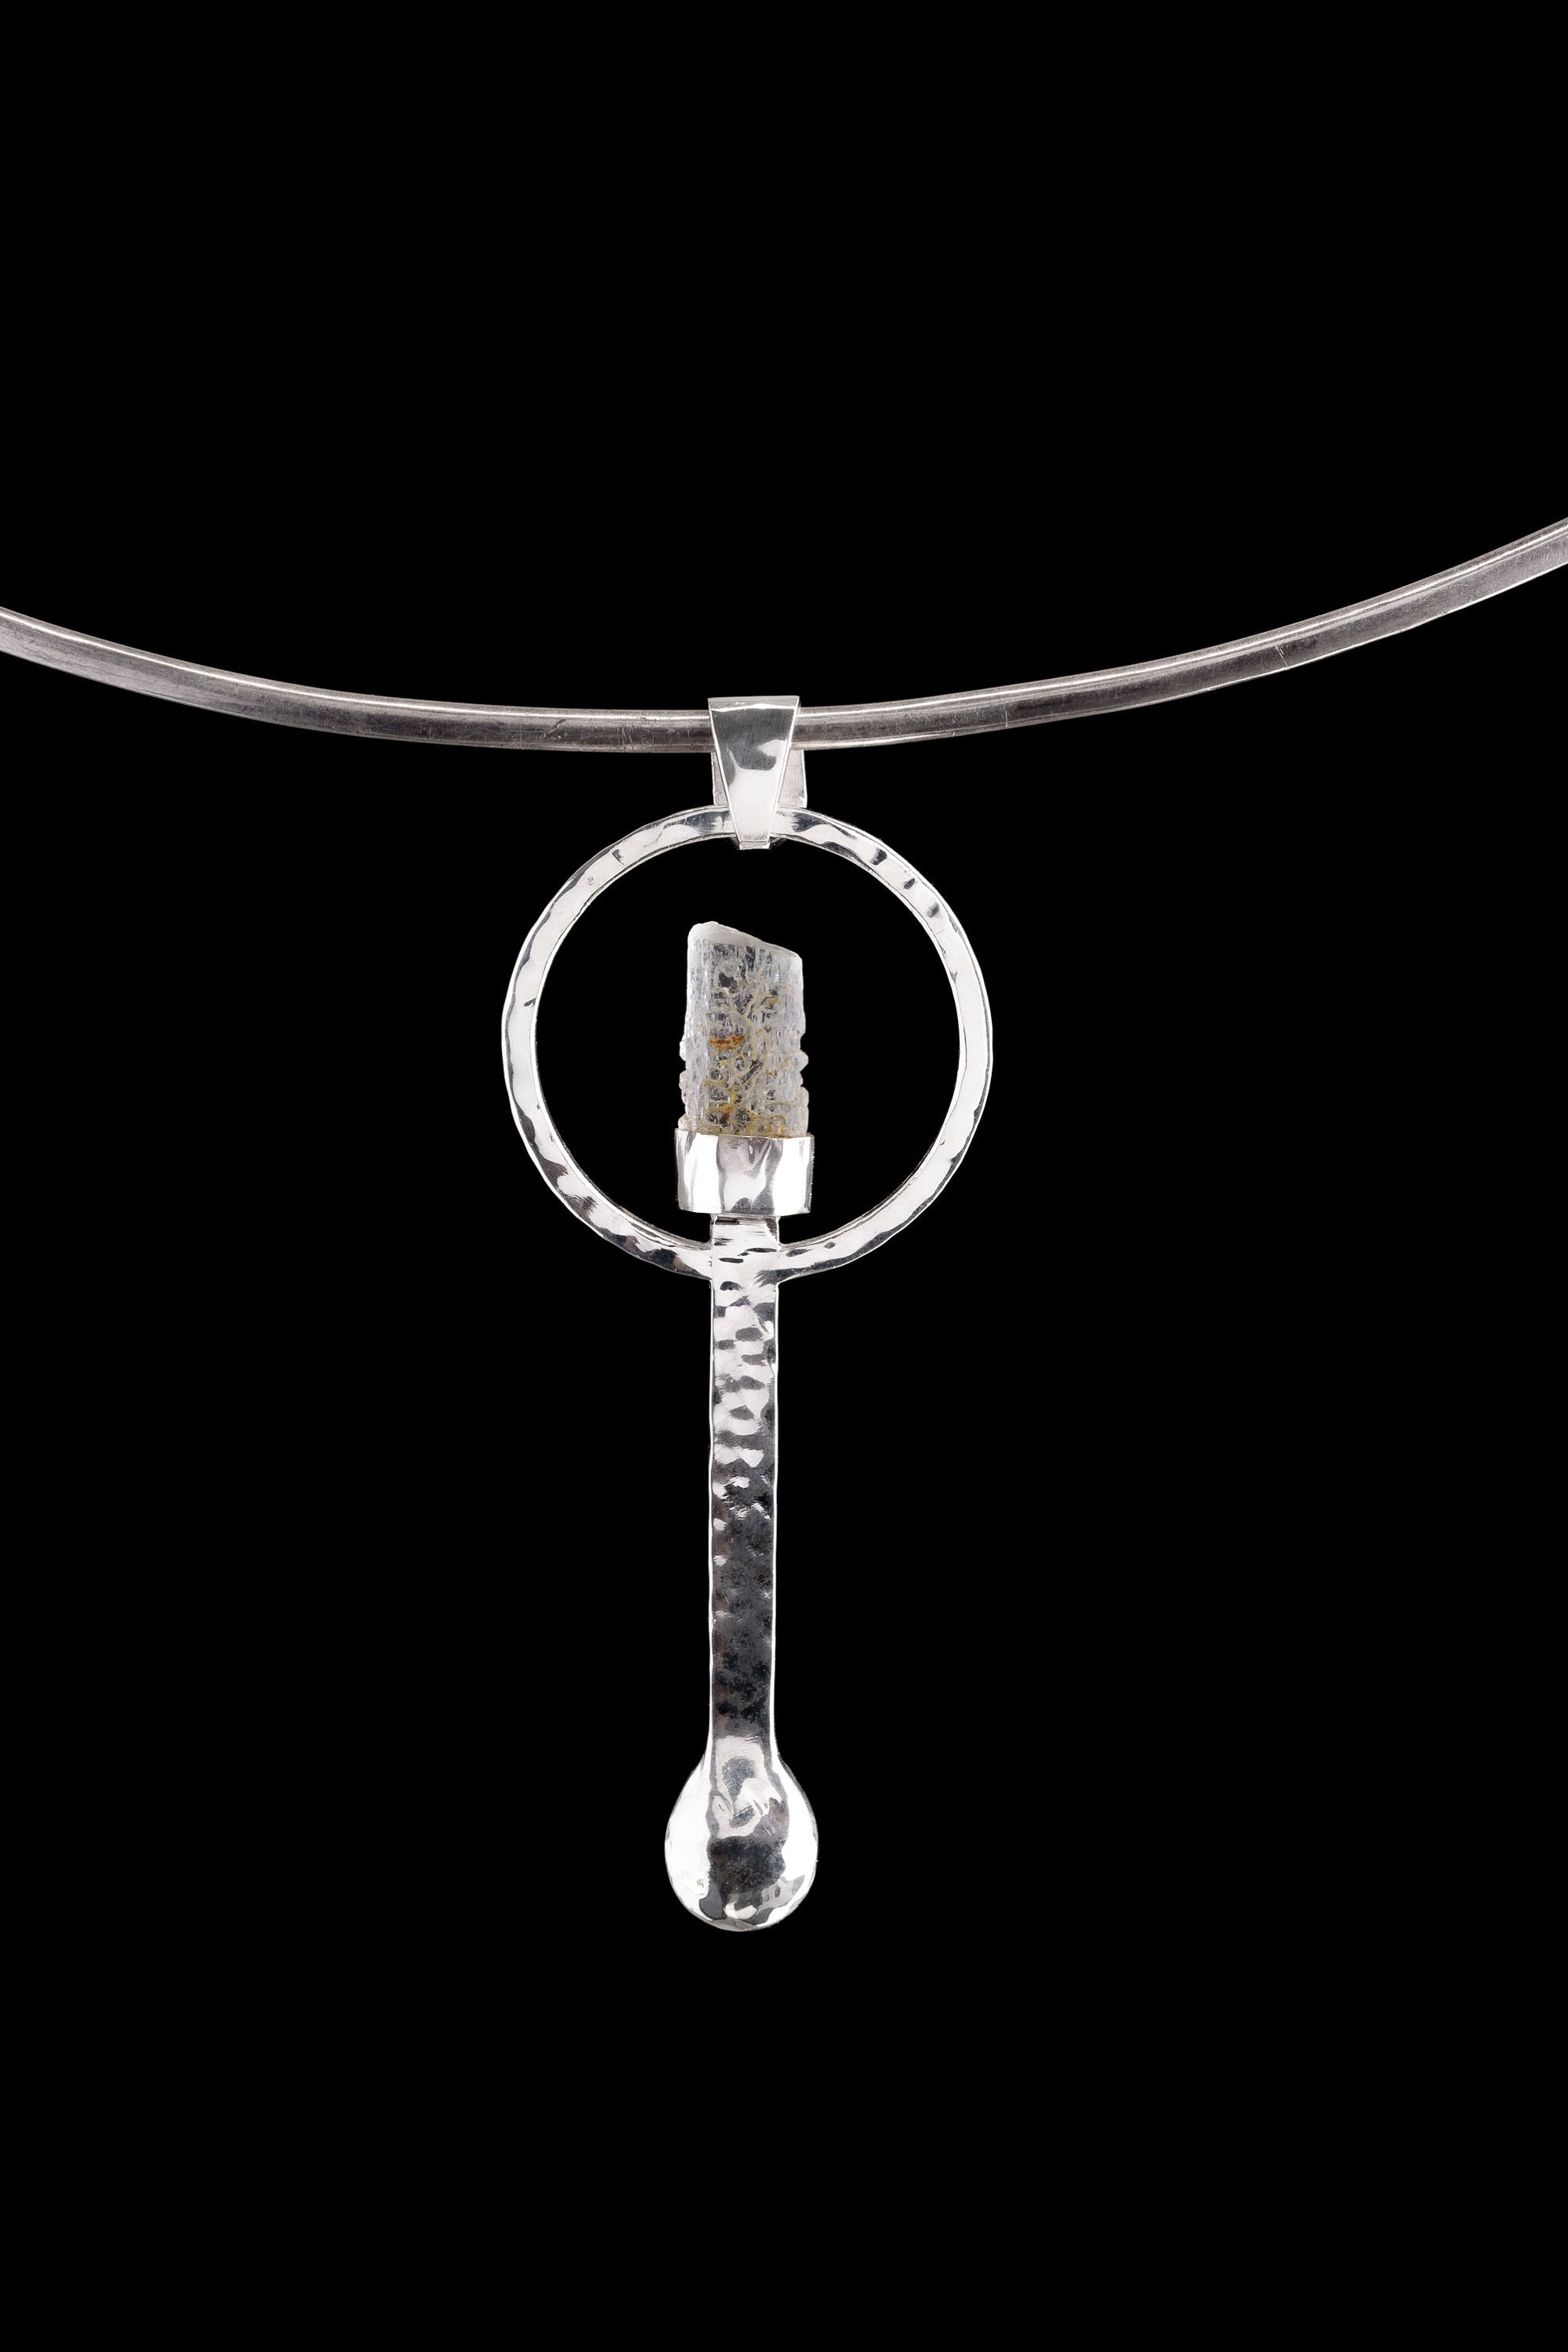 Small Spice / Ceremonial Spoon - Raw Himalayan Aquamarine - Solid 925 Cast Silver - Unique Hammer Textured - Crystal Pendant Necklace -